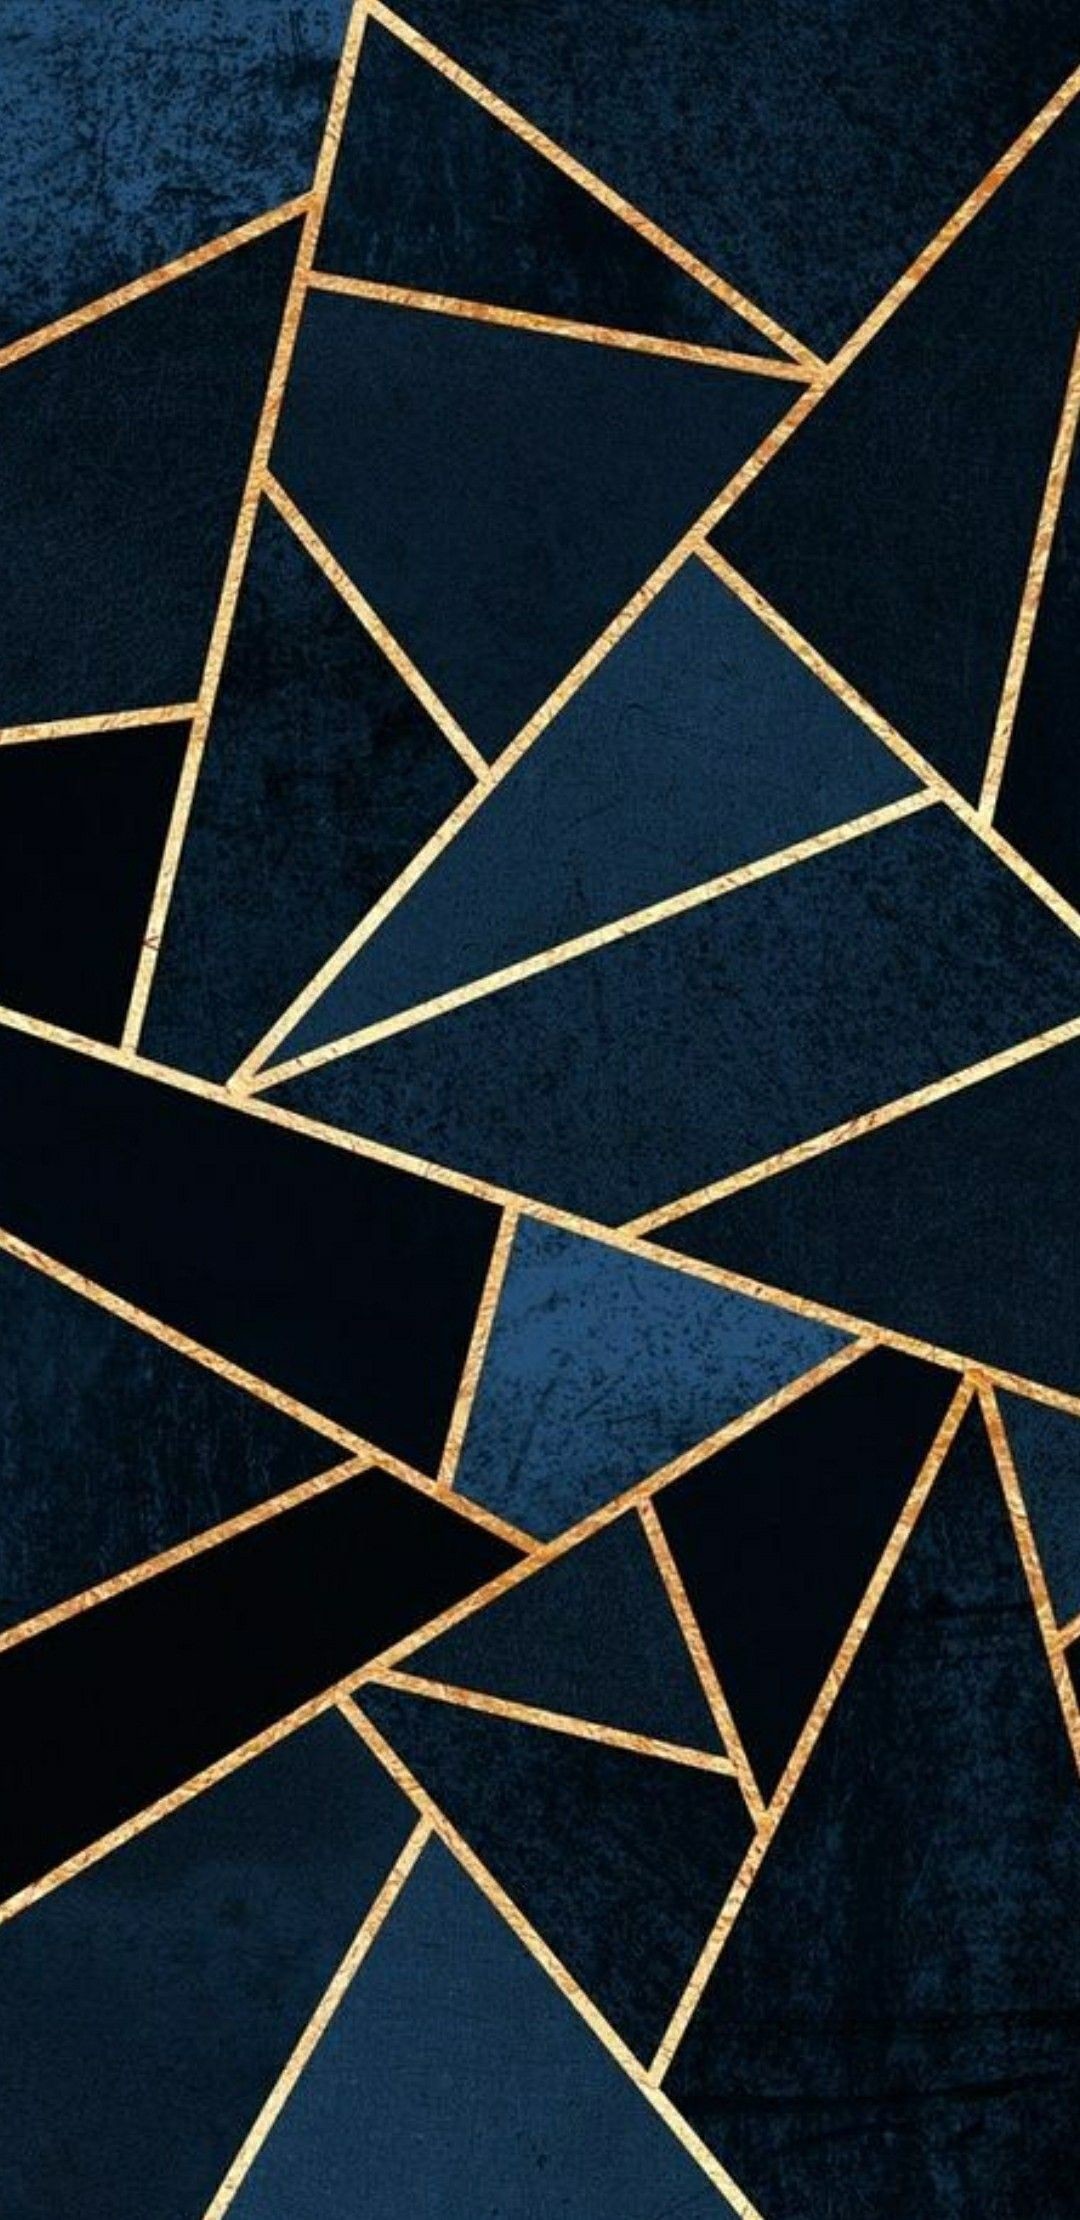 1080x2220 My favorite combo- dark blue with gold!